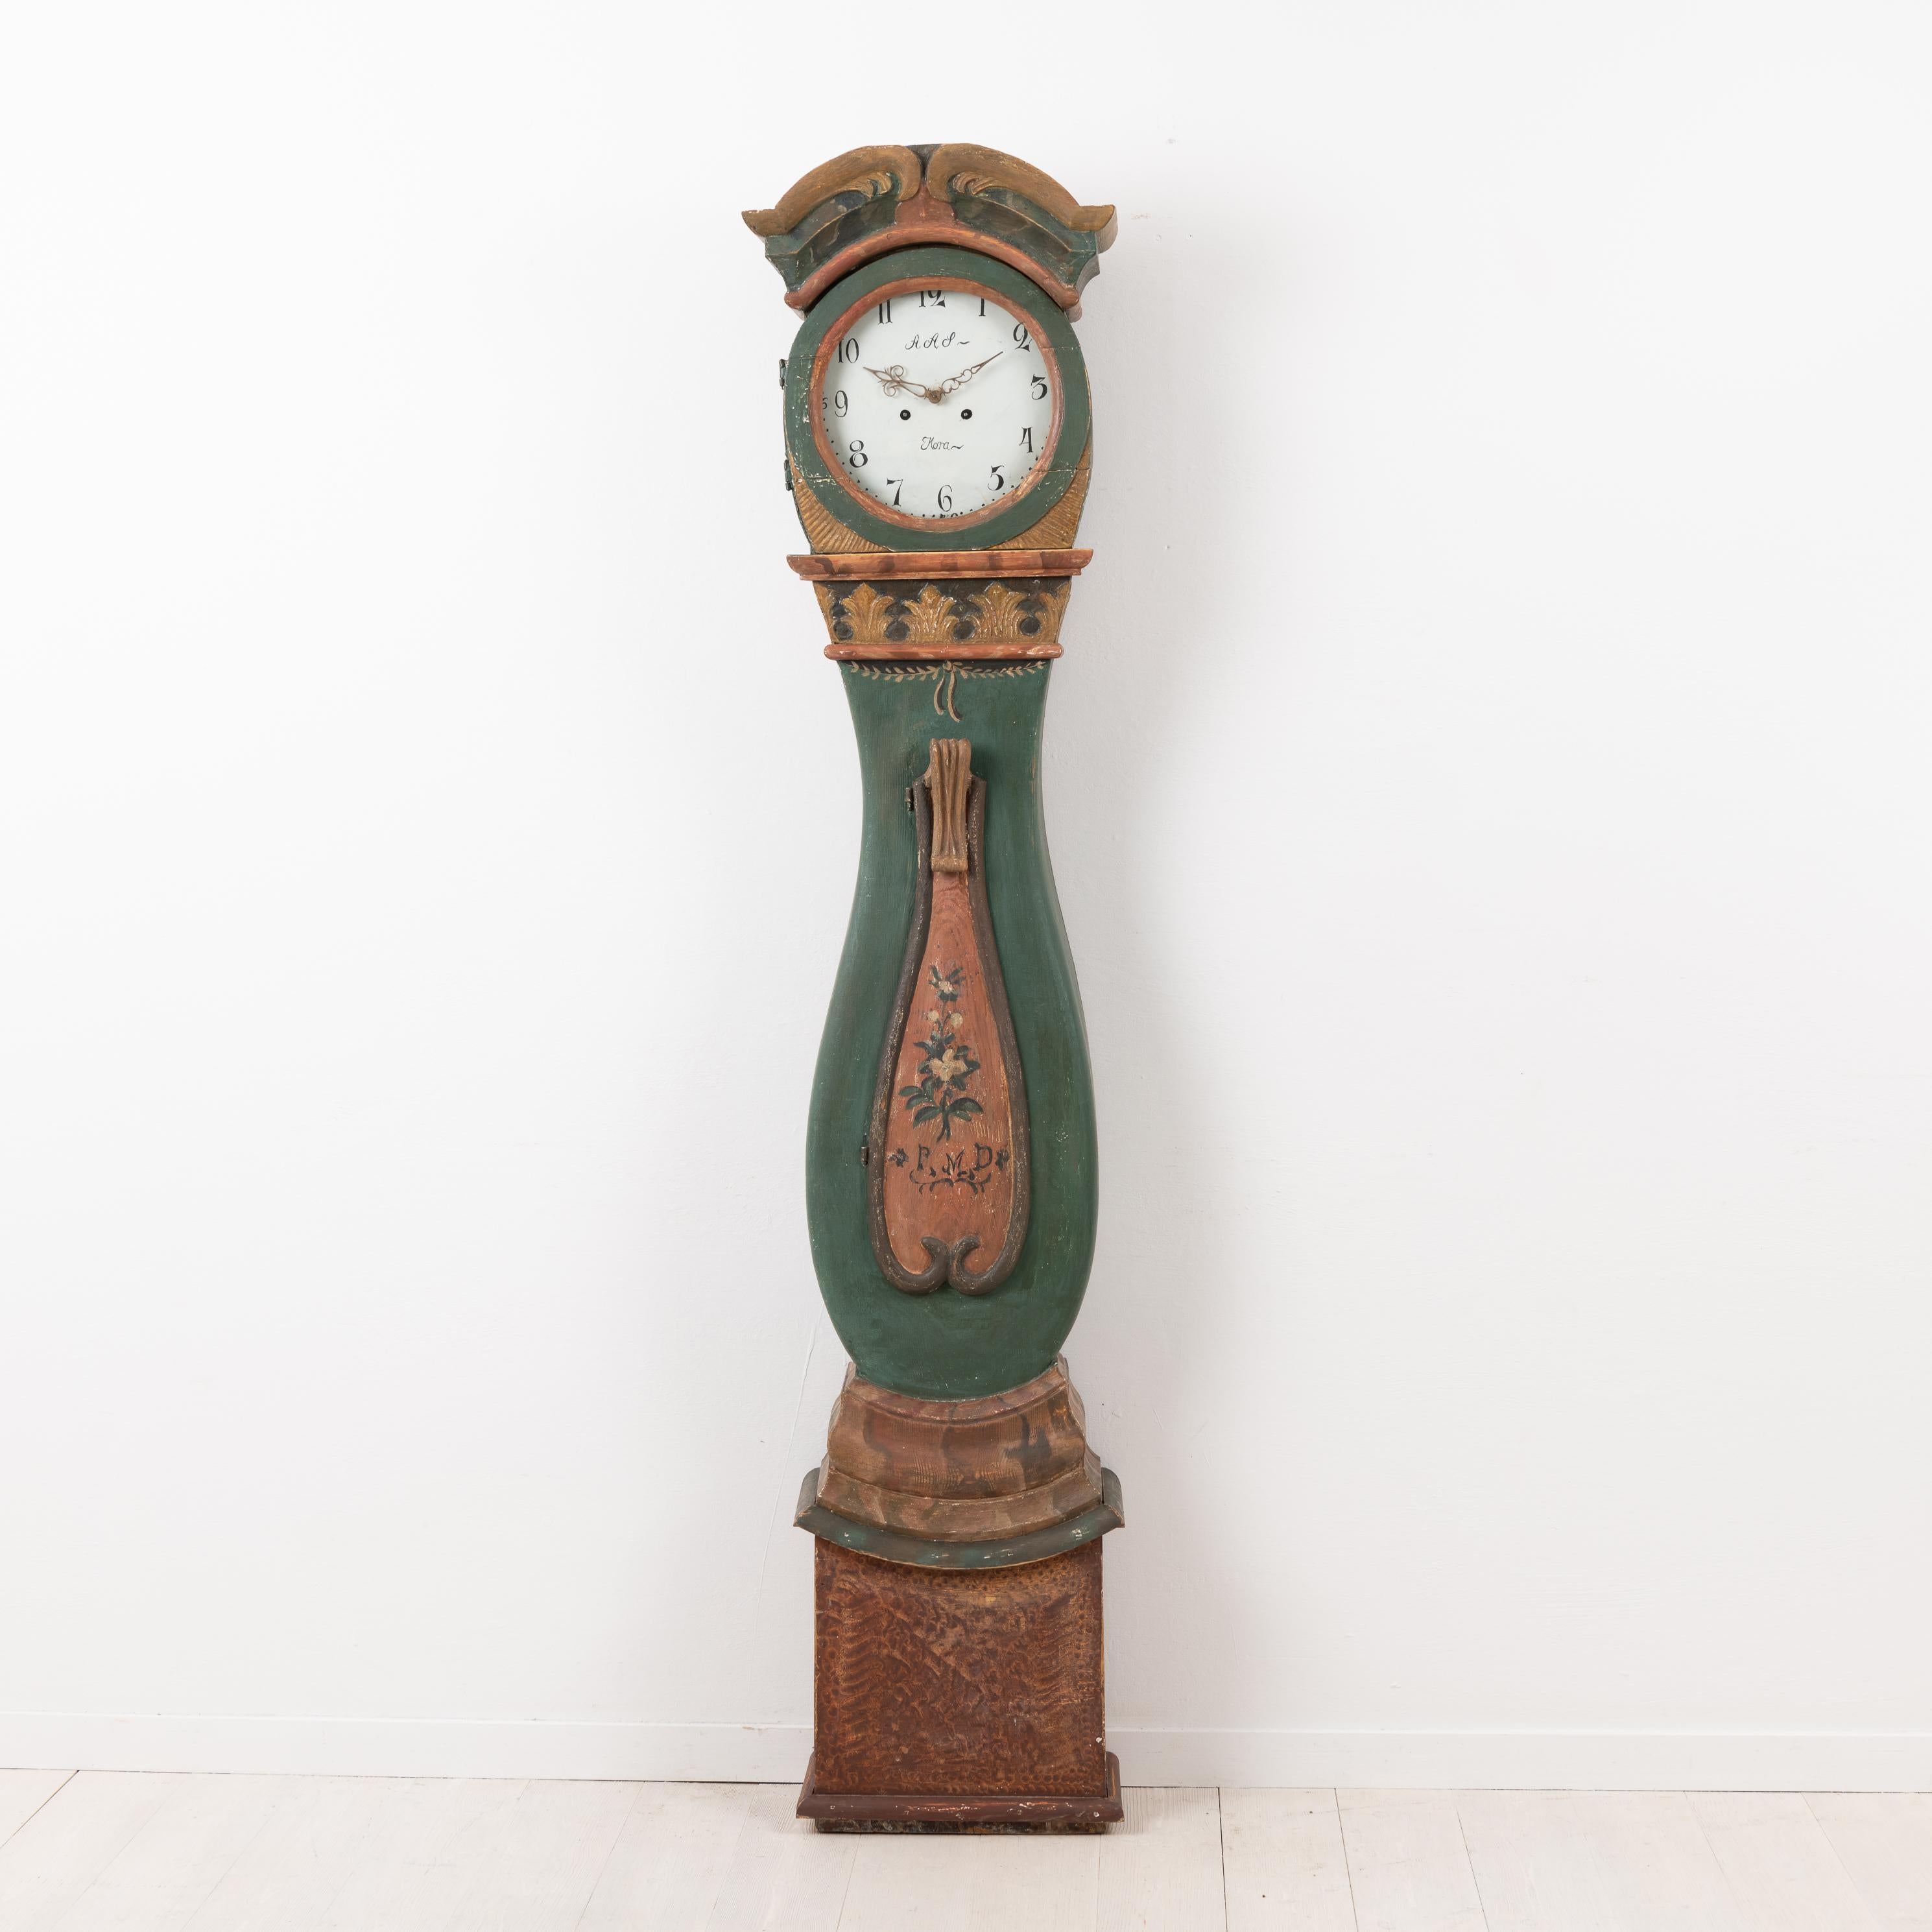 Swedish Rococo long case clock in Folk Art from the northern part of the country. Made in the province Jämtland around 1780 to 1790. The clock is made from large pieces of Swedish pine. Hand carved wooden decorations especially around the top. Old